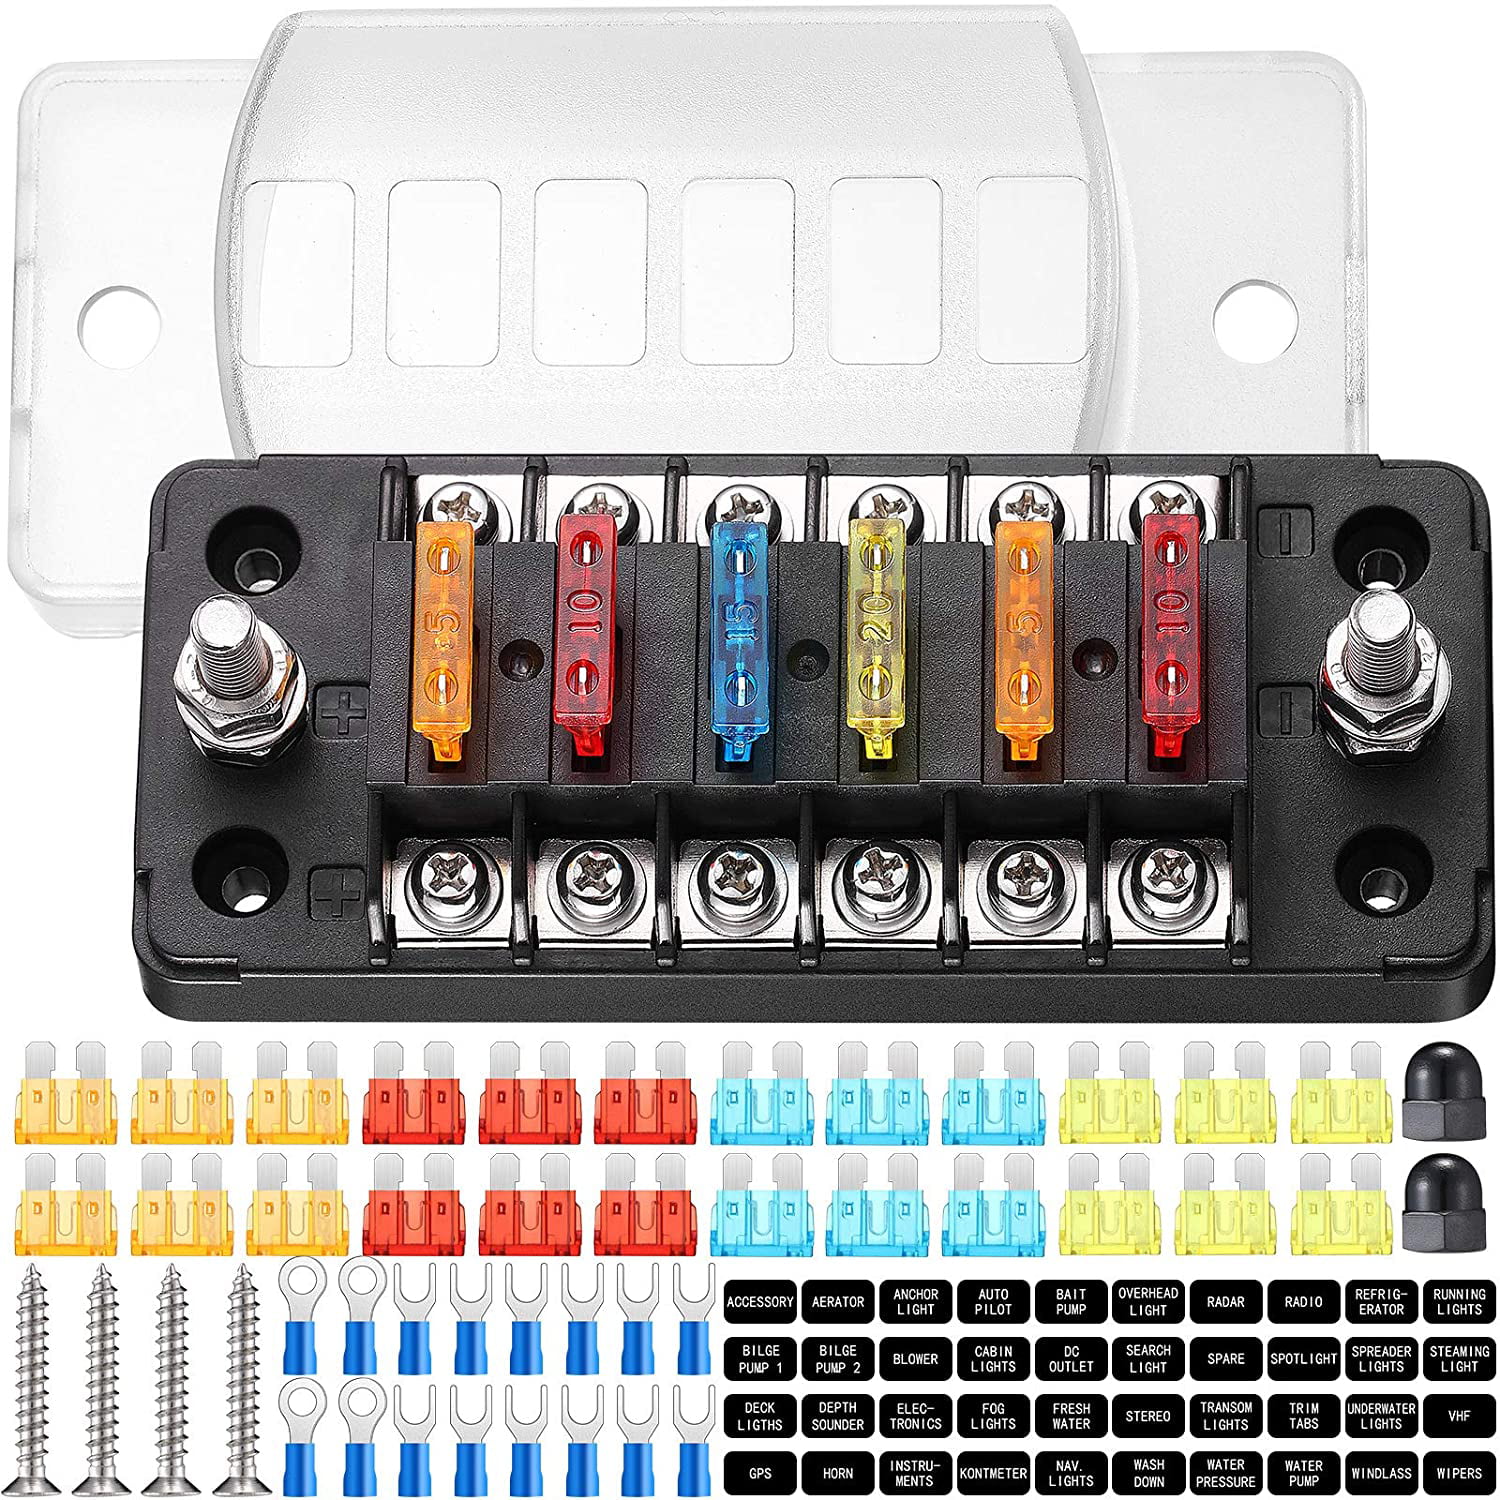 2 Sets Label Stickers 24 Pieces 5A 10A 15A 20A Fuses 16 Pieces Wire Lugs Rings U Shaped Terminal Connectors 4 Pieces Screws for Car Boat 6-Way Automotive Fuse Box Holder 6 Circuit Fuse Holder 